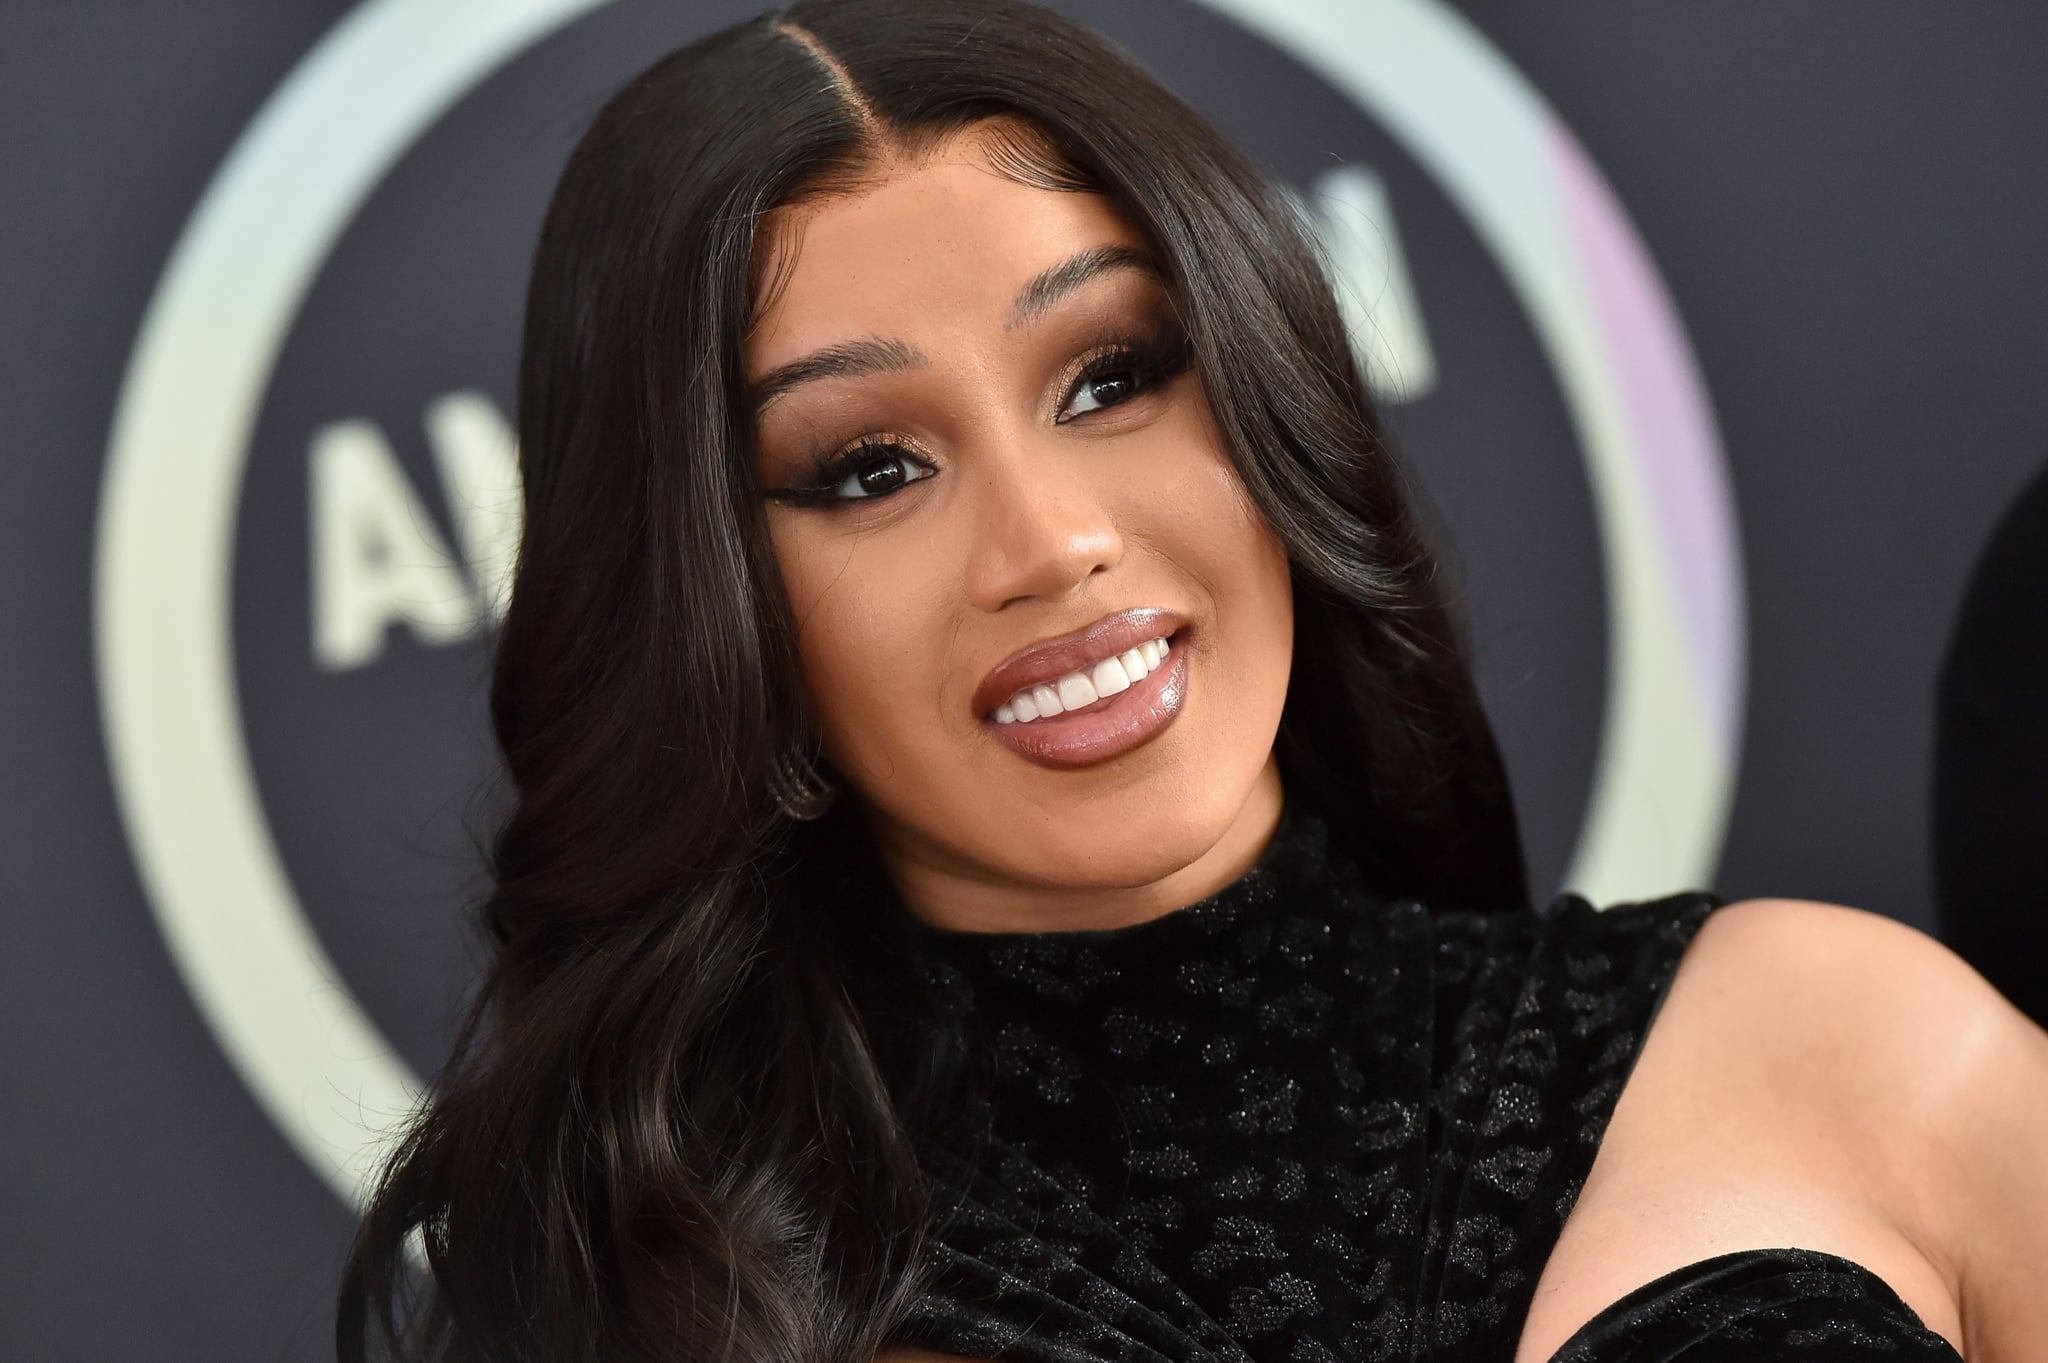 LOS ANGELES, CALIFORNIA - NOVEMBER 19: Cardi B attends the 2021 American Music Awards Red Carpet Roll-Out with host Cardi B at L.A. LIVE on November 19, 2021 in Los Angeles, California. (Photo by Axelle/Bauer-Griffin/FilmMagic)